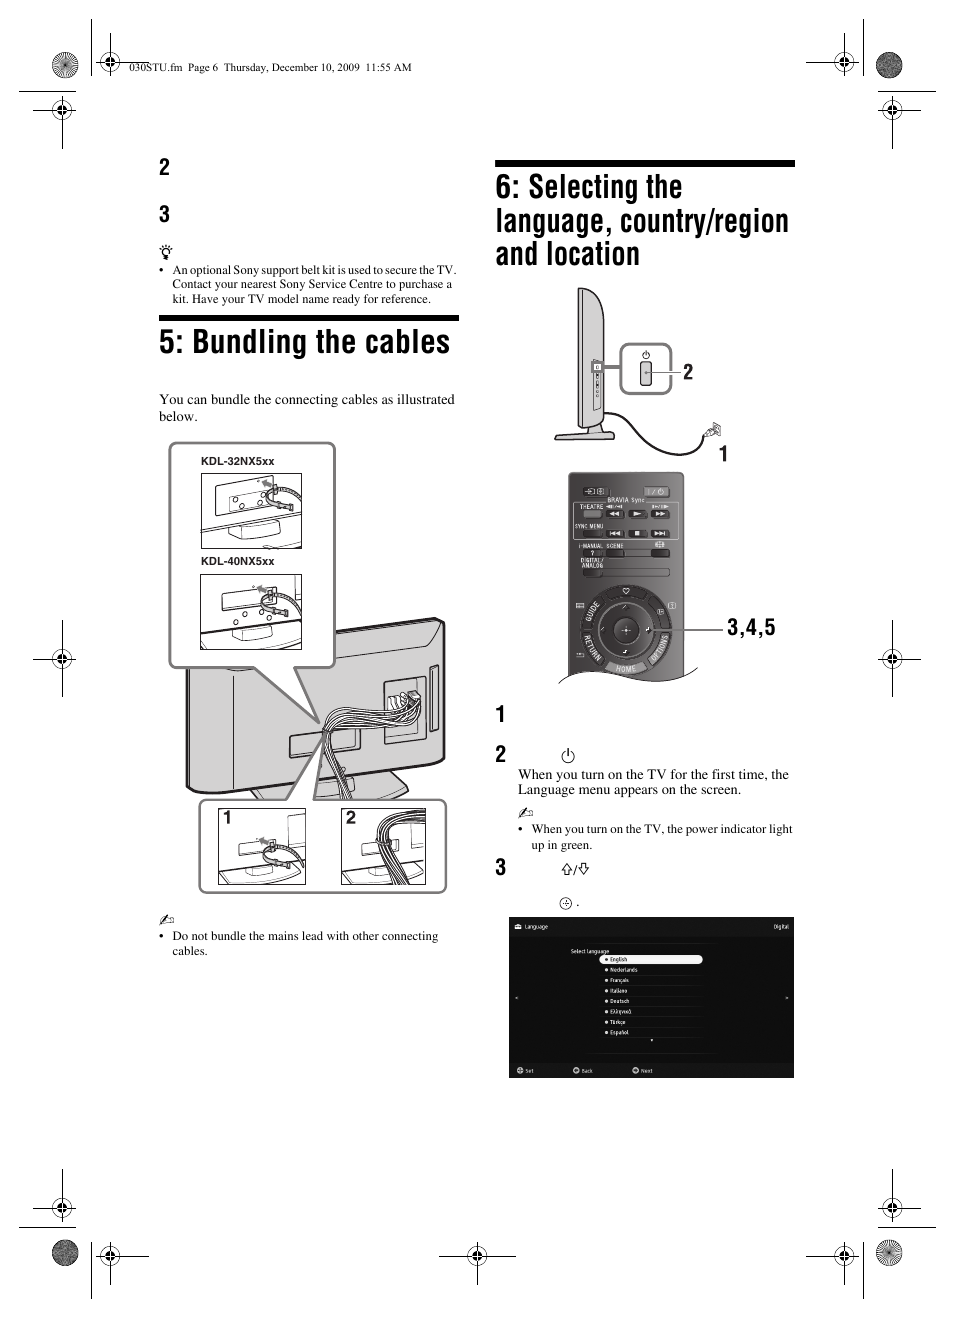 Bundling the cables | Sony BRAVIA KDL-22EX3xx User Manual | Page 6 / 39